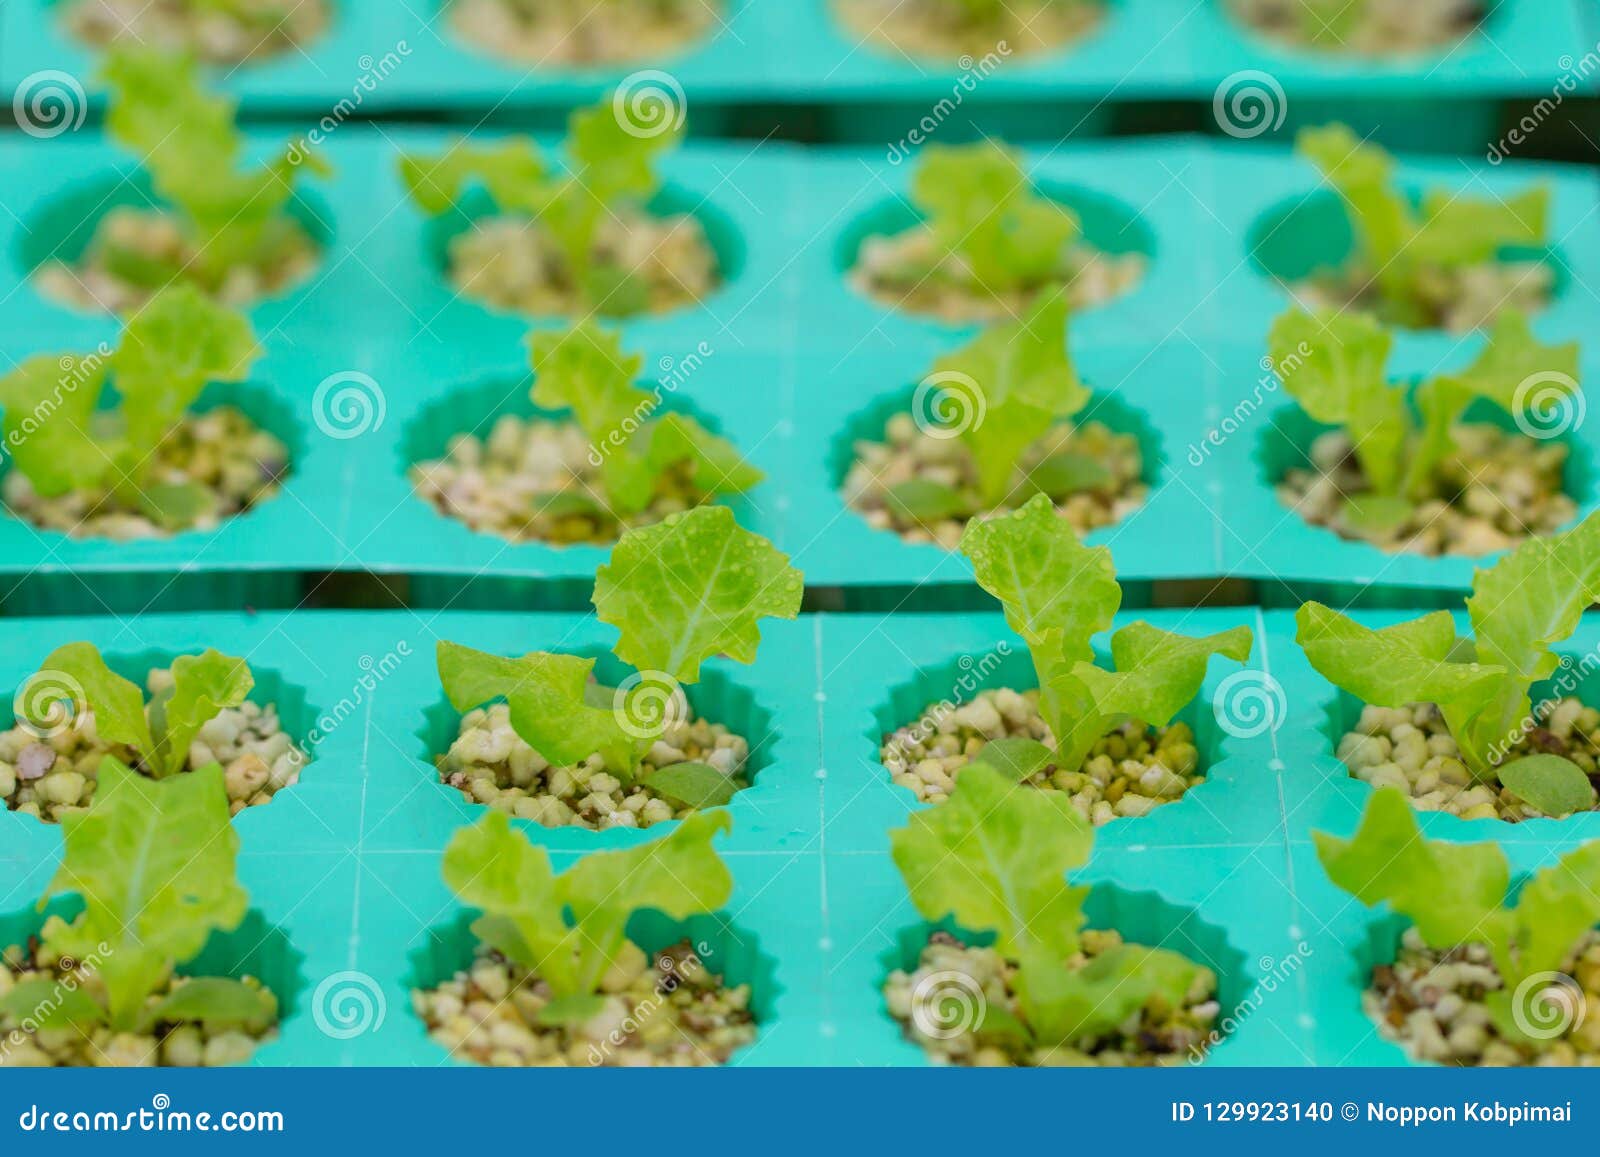 fresh hydroponic vegetable row in farm. agricultural plants organic vegetable salad in garden.